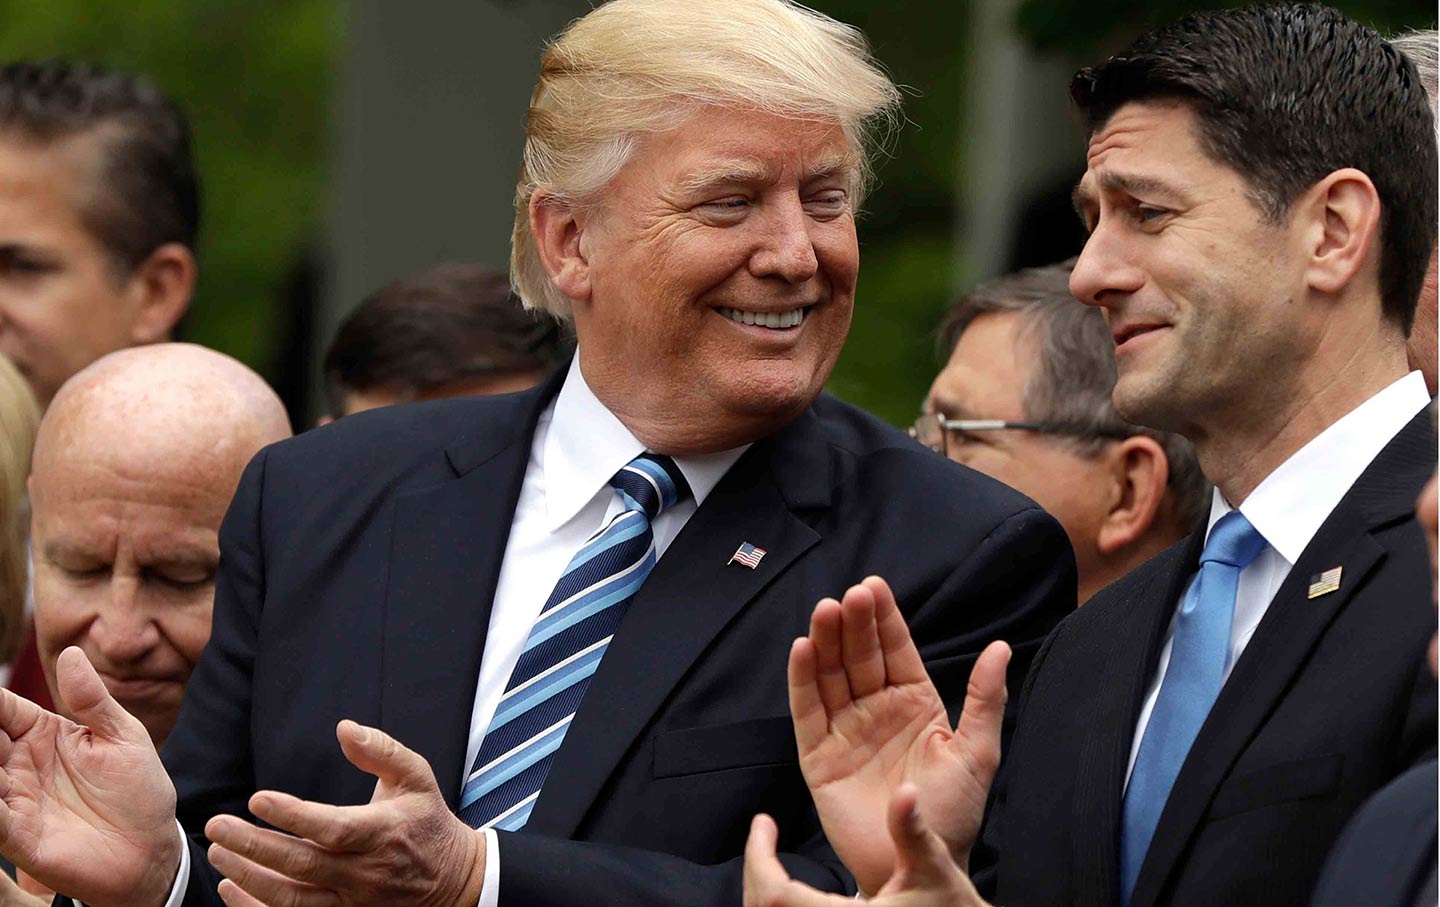 Paul Ryan and Devin Nunes Are Betraying the Constitution in the Service of Donald Trump